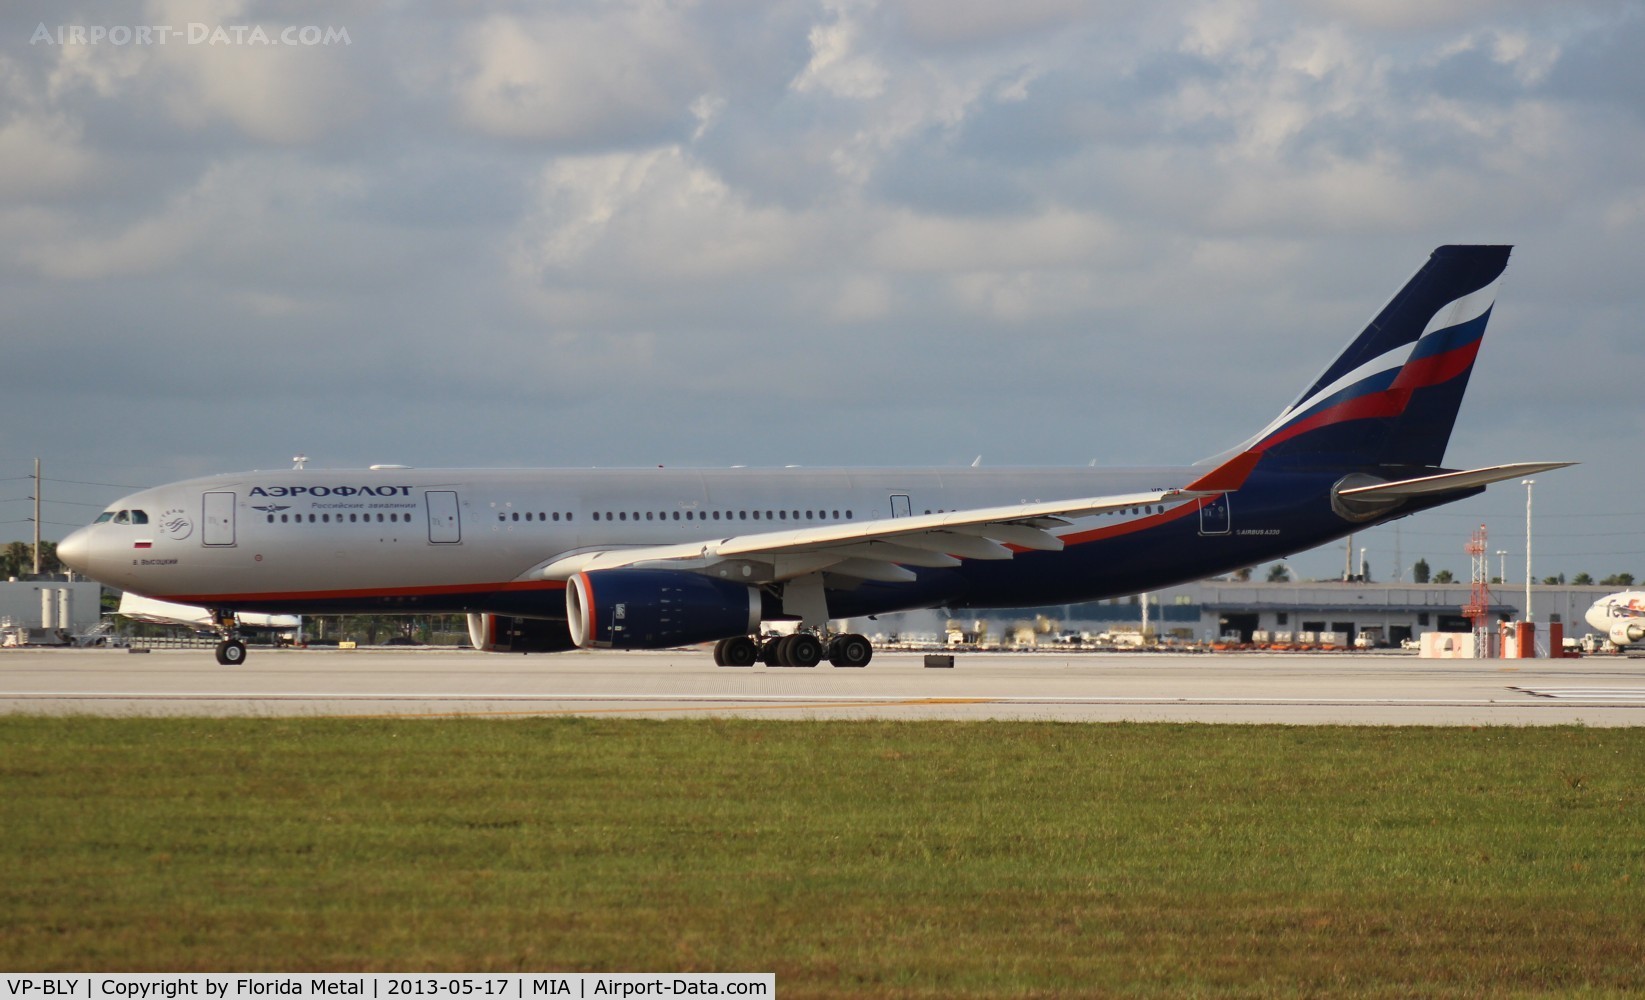 VP-BLY, 2008 Airbus A330-243 C/N 973, Aeroflot Russian Airlines A330-200